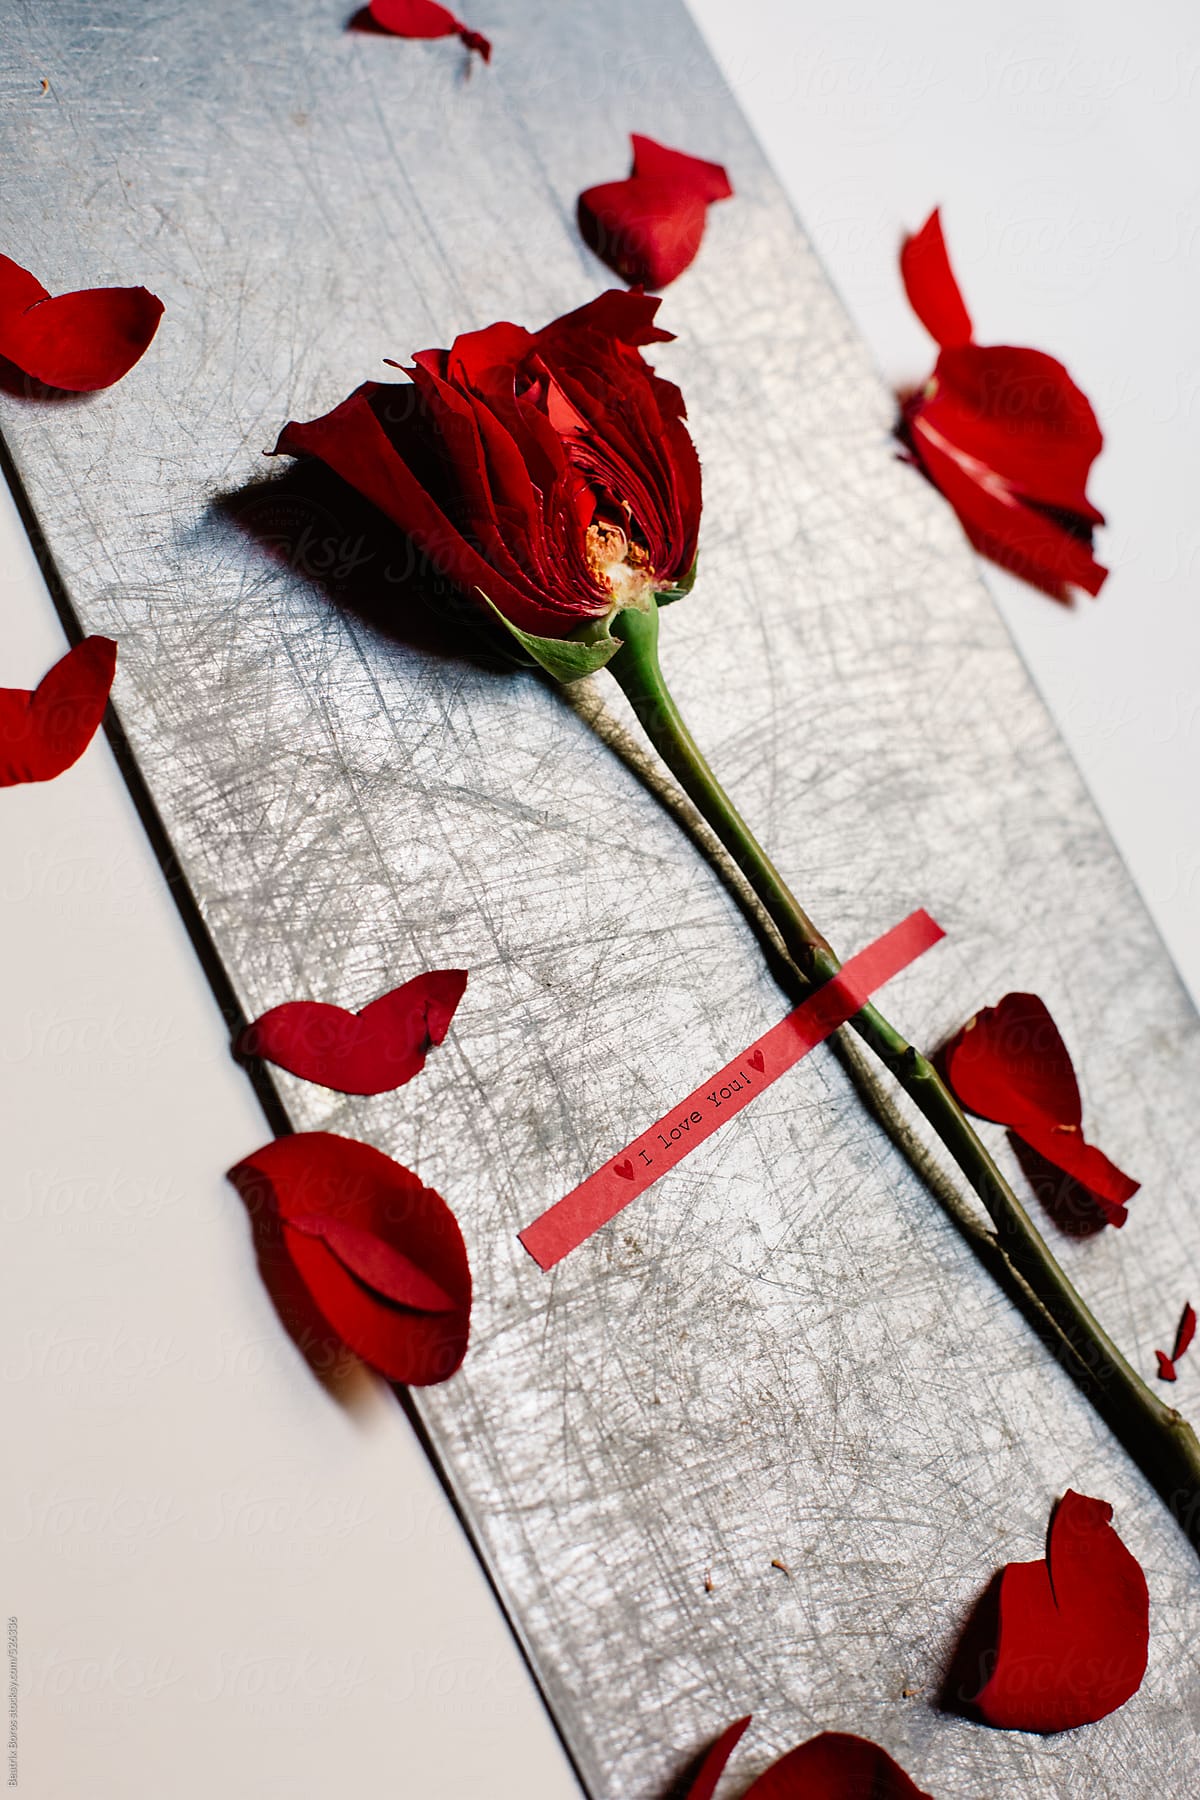 Red dissected rose on a metal surface with a message 